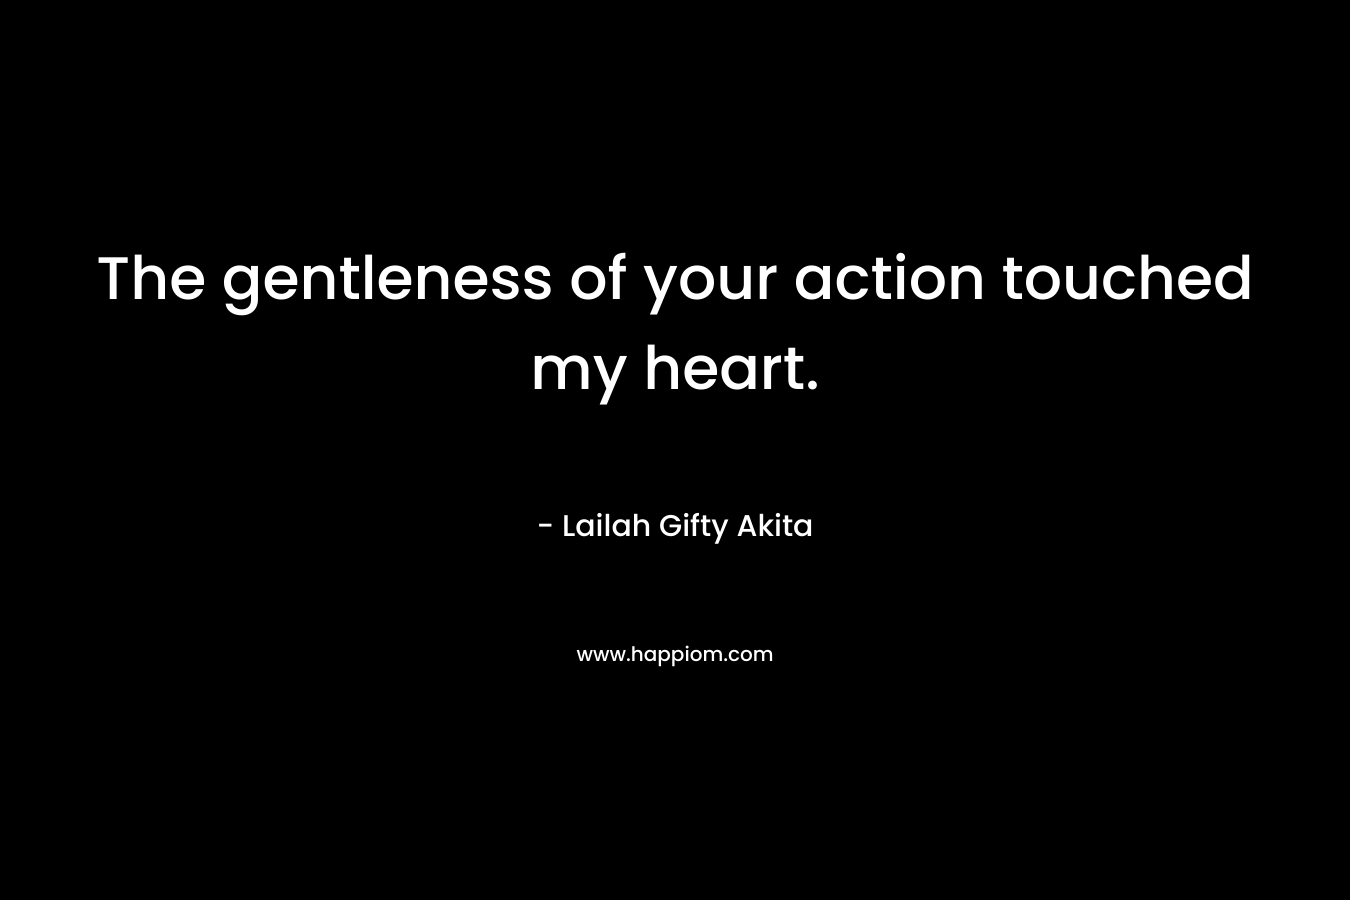 The gentleness of your action touched my heart. – Lailah Gifty Akita